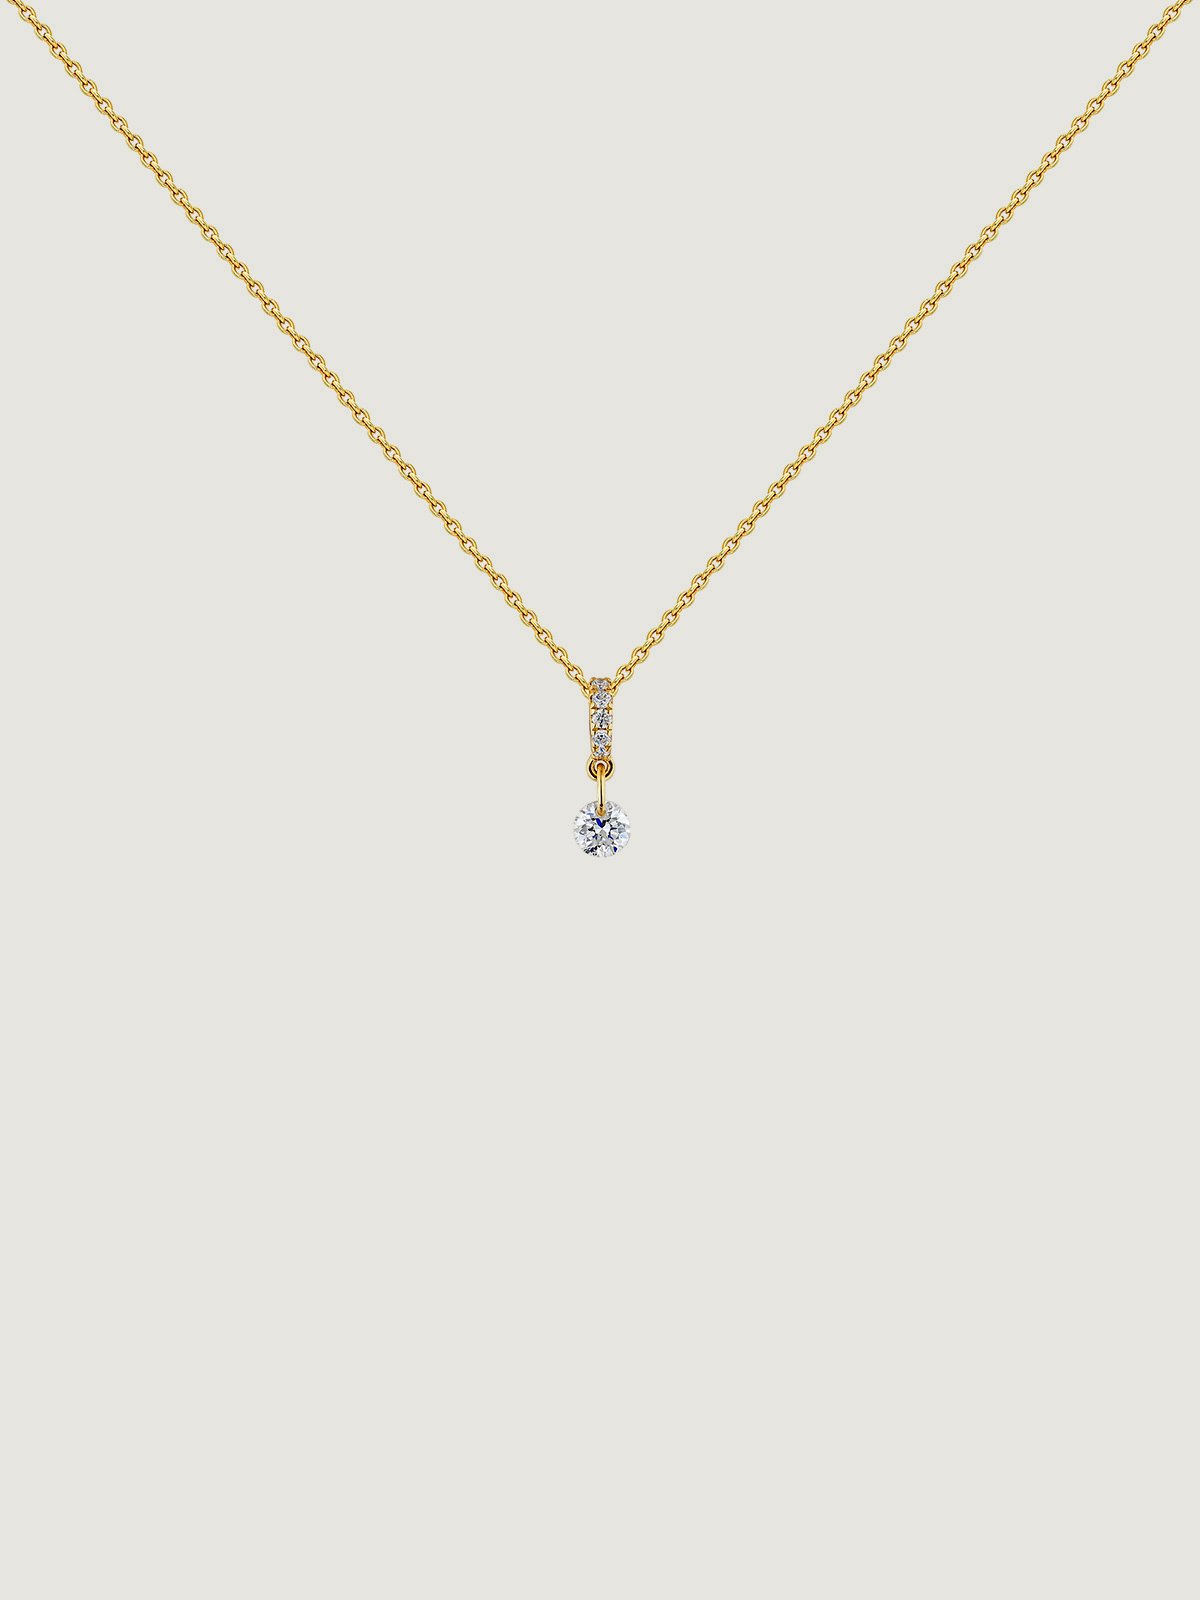 18K yellow gold pendant with 0.098 cts diamonds